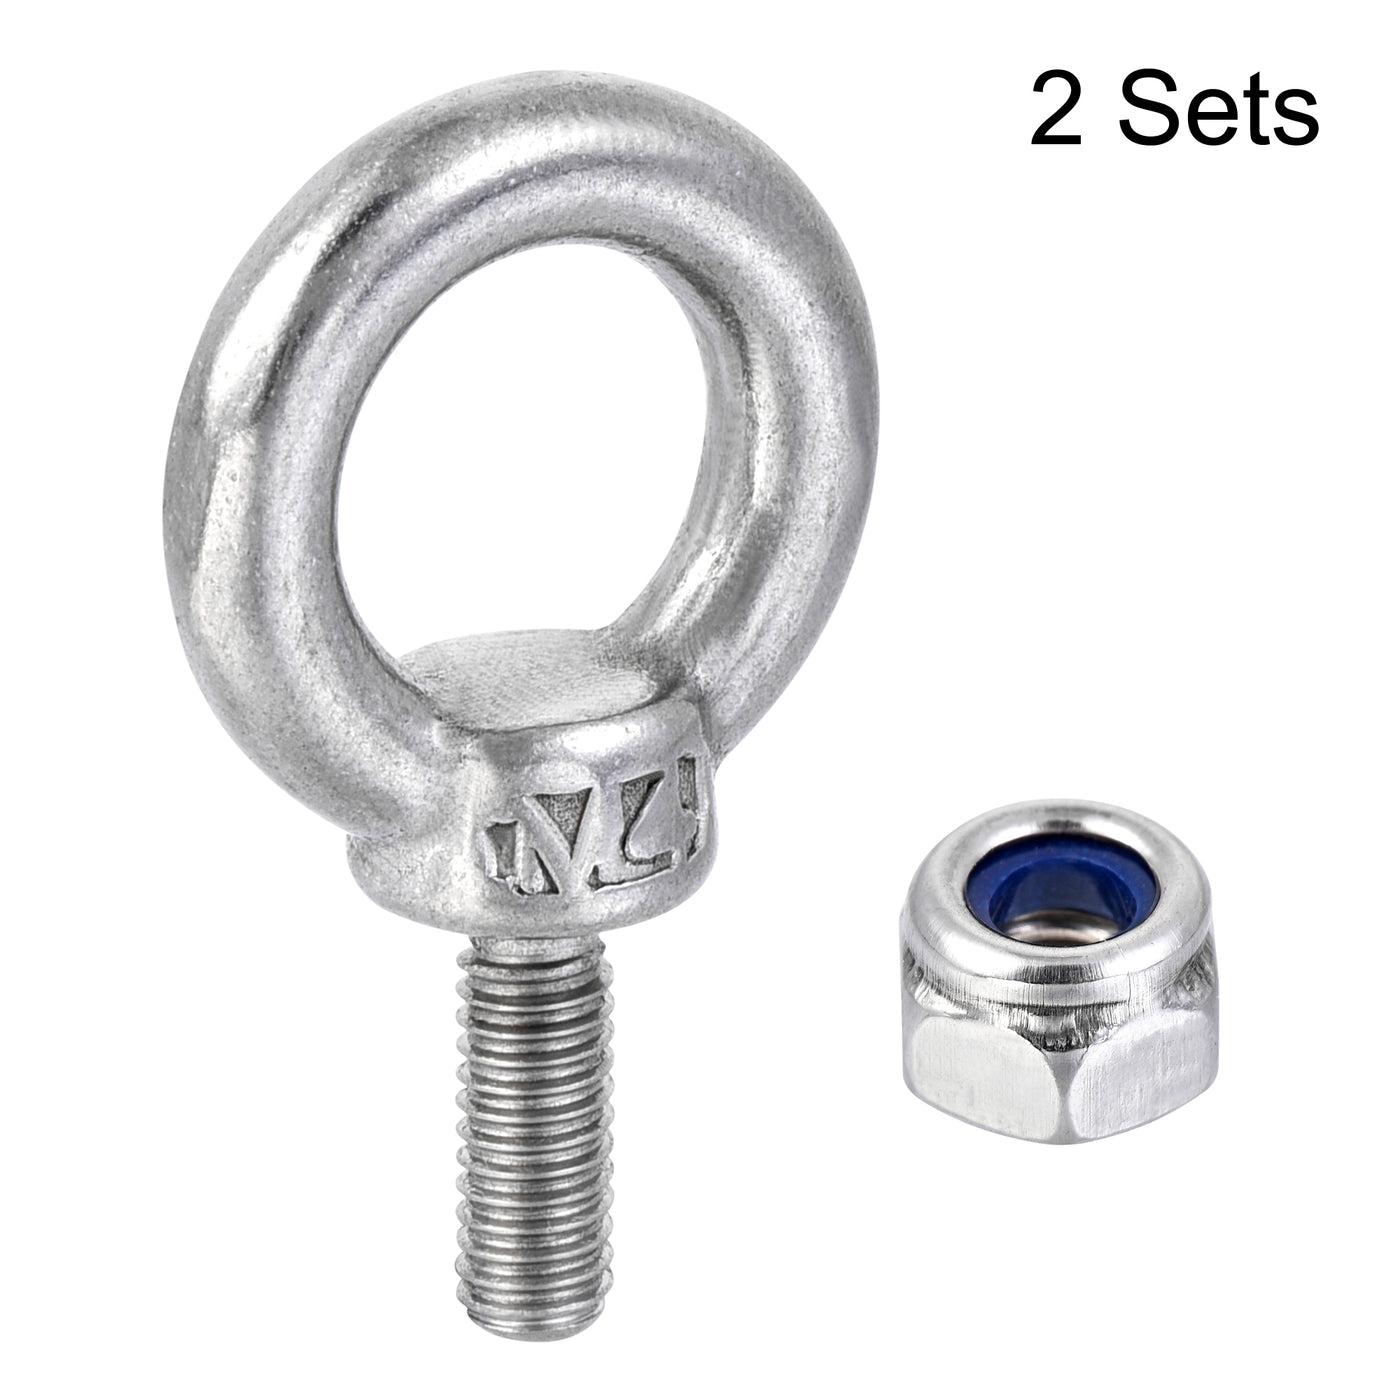 uxcell Uxcell Lifting Eye Bolt M4 x 11mm Male Thread with Hex Screw Nut for Hanging, 304 Stainless Steel, 2 Sets